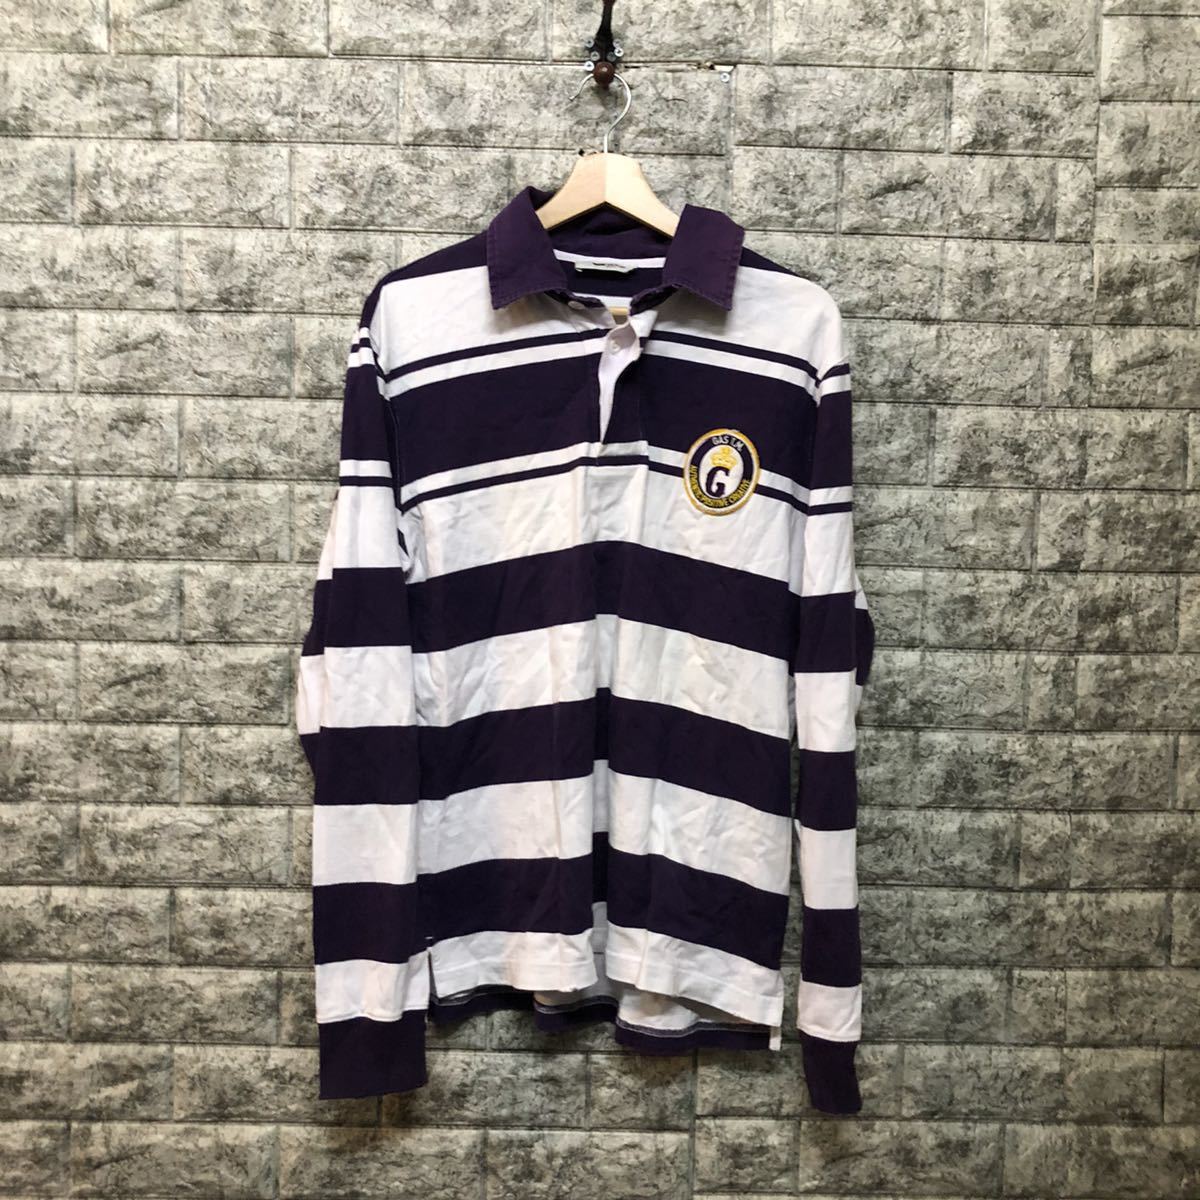 GAS gas border polo-shirt with long sleeves Rugger shirt polo-shirt with long sleeves old clothes purple white two-tone long sleeve cut and sewn Ralph Lauren L size 